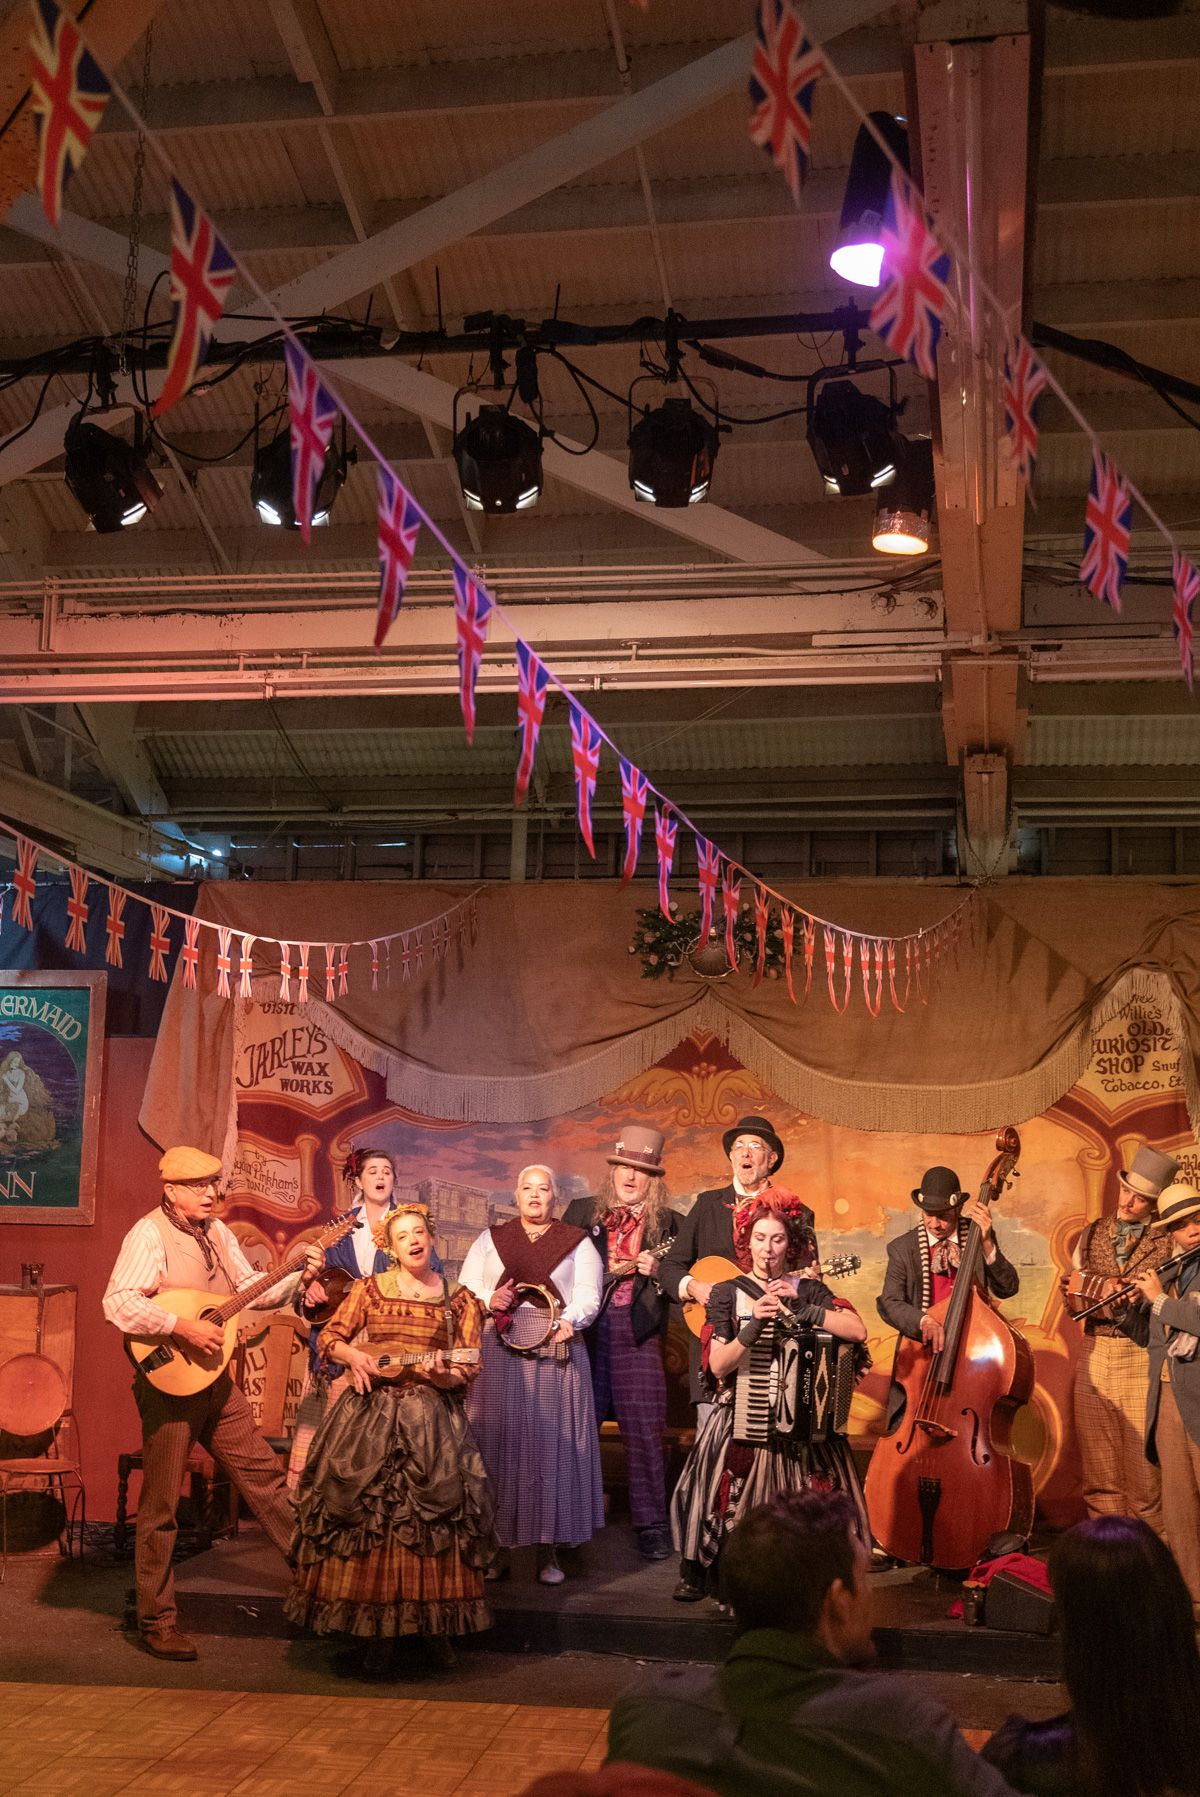 A crowd of costumed Dickensian performers sing together on a warmly-lit stage.